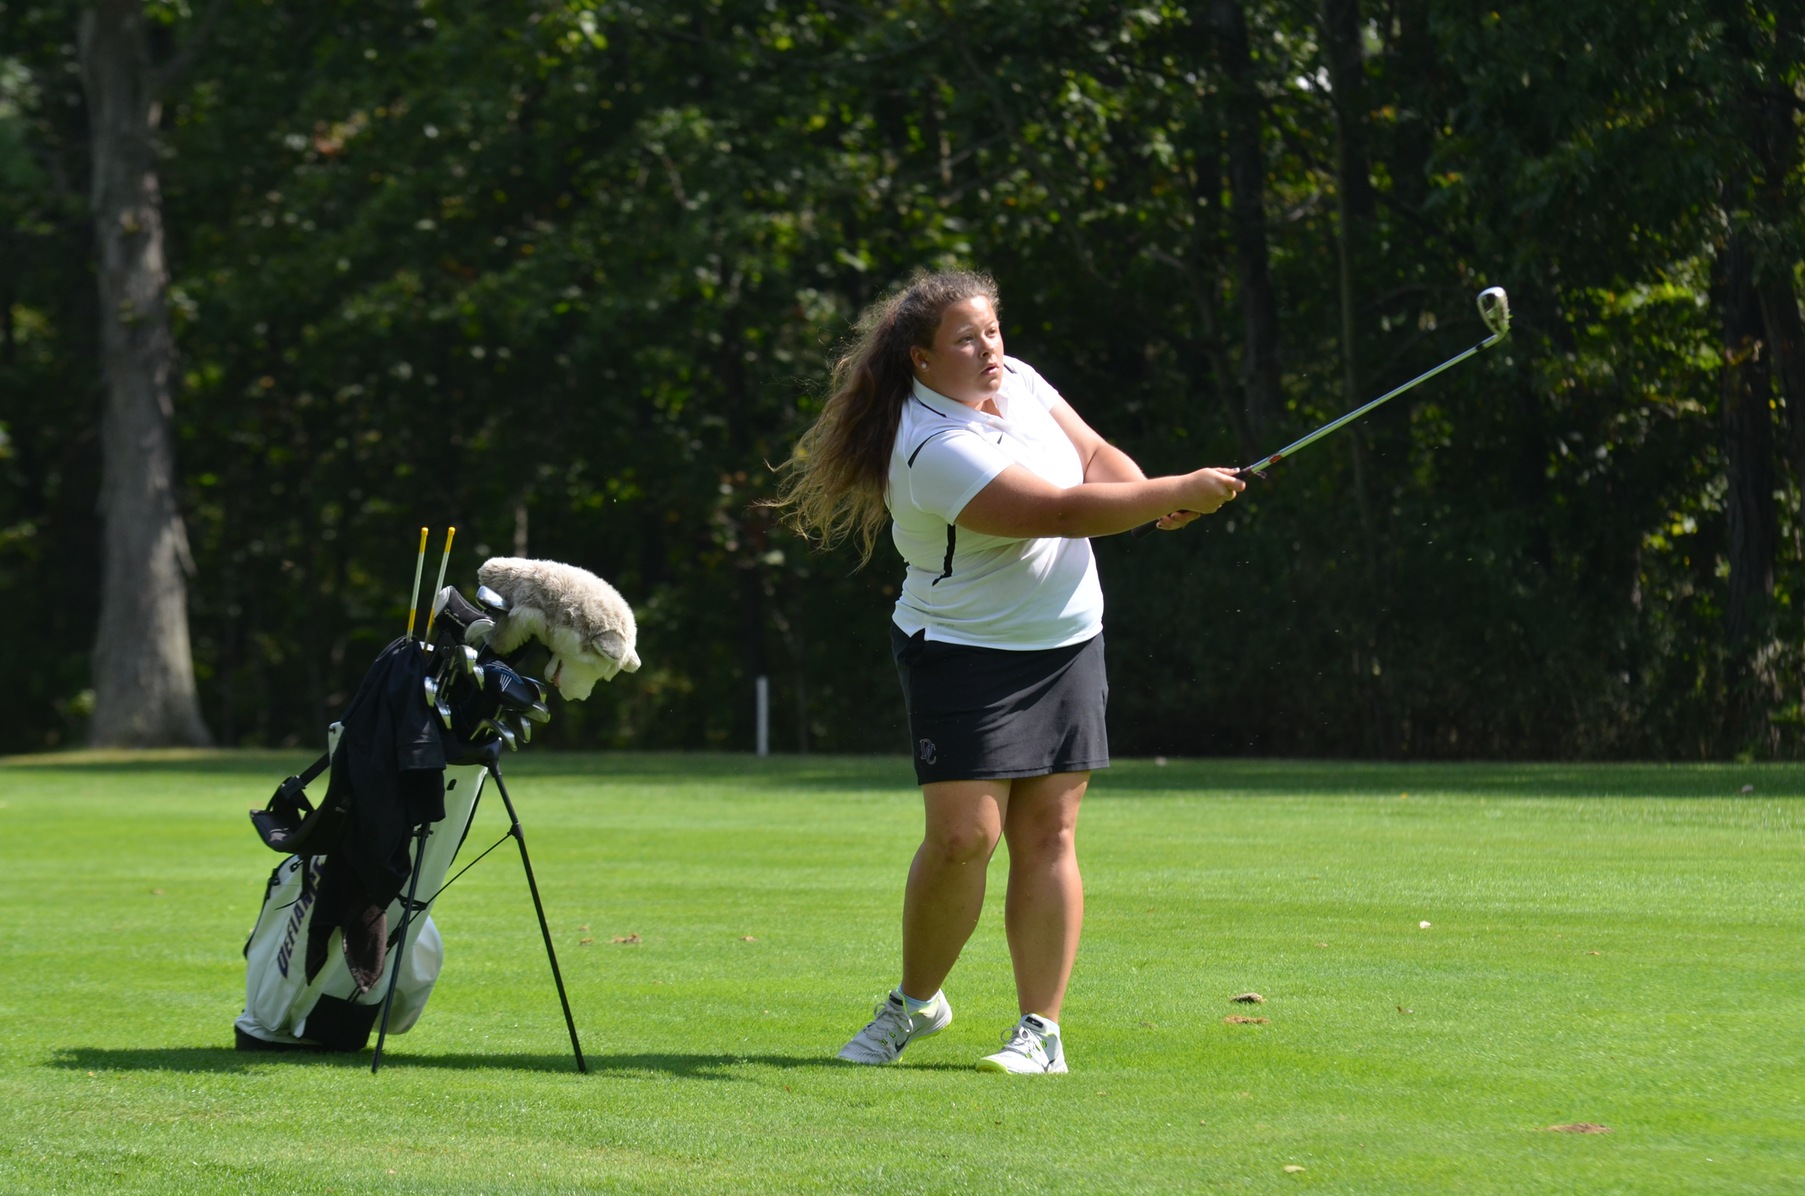 Women's Golf Competes at Earlham College Fall Invitational